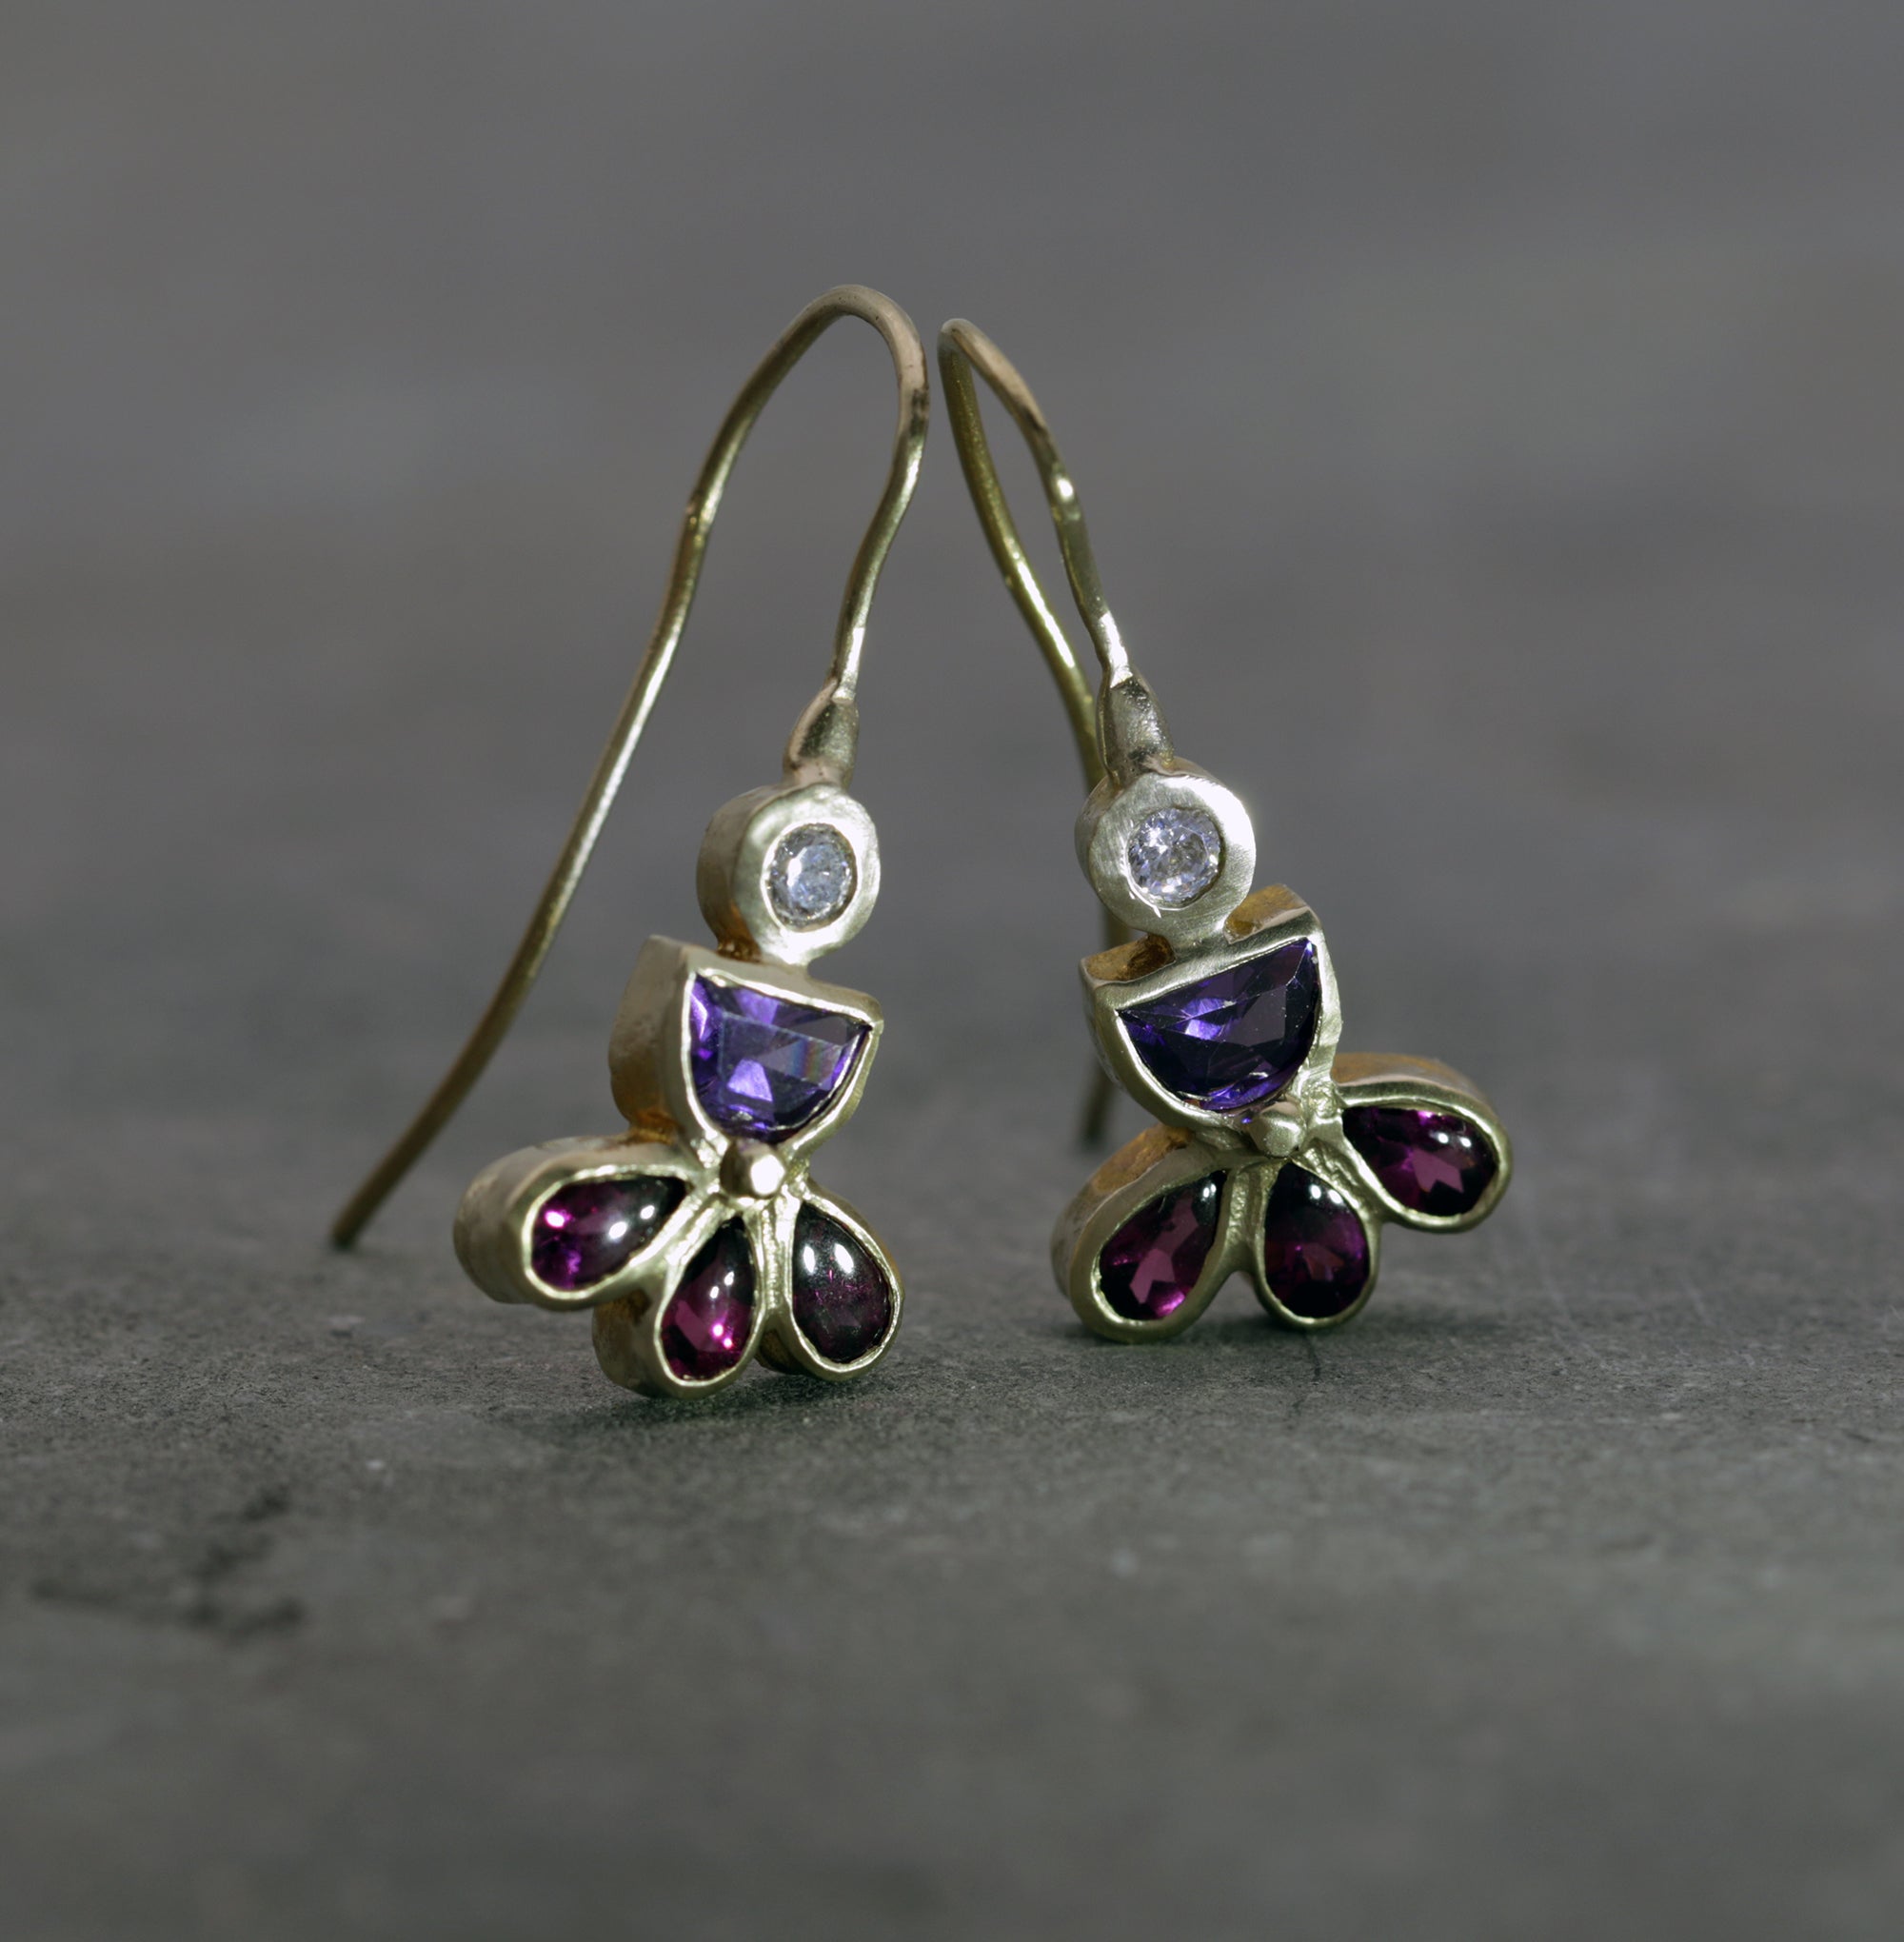 Amethyst and Garnet Multi Gemstone Earrings - Gold Plated Chic Dainty Earrings - Everyday Earrings. Gifts Jewelry for Daughter, Mom, Wife